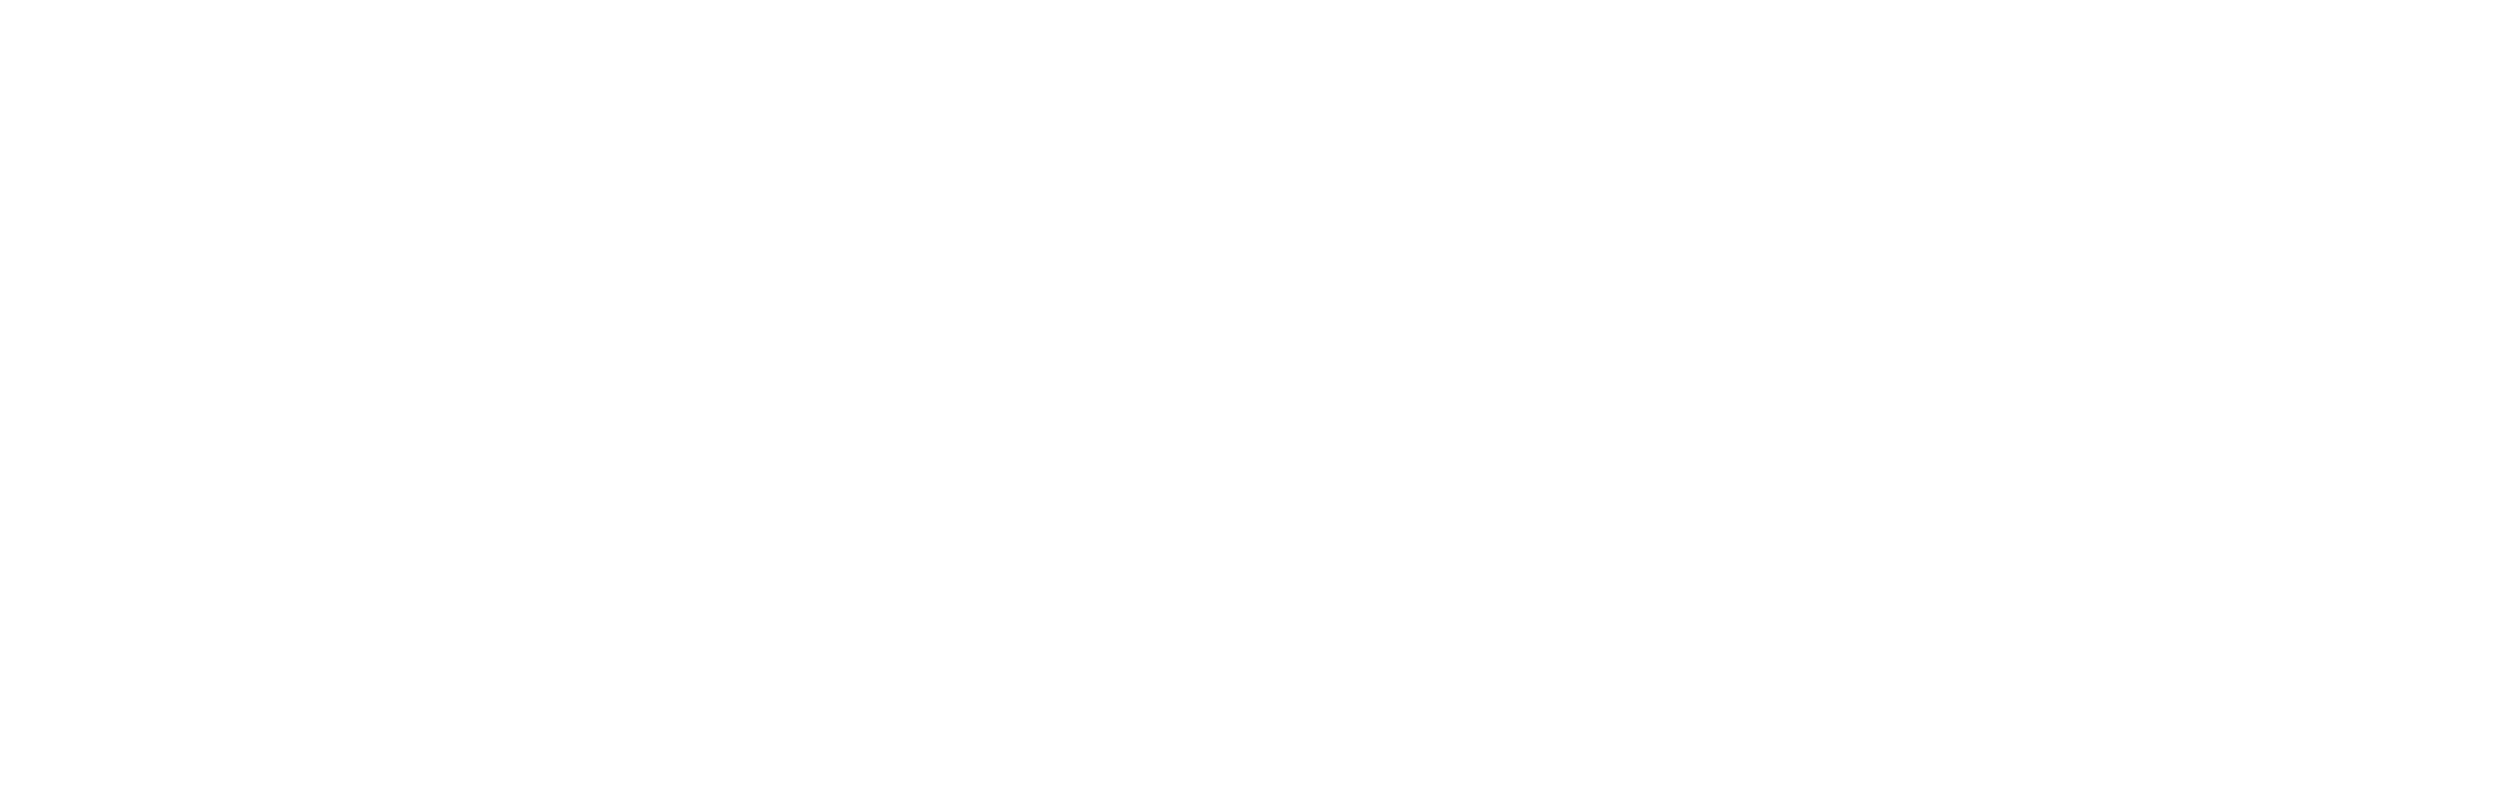 WILD HEIGHTS EVENTS